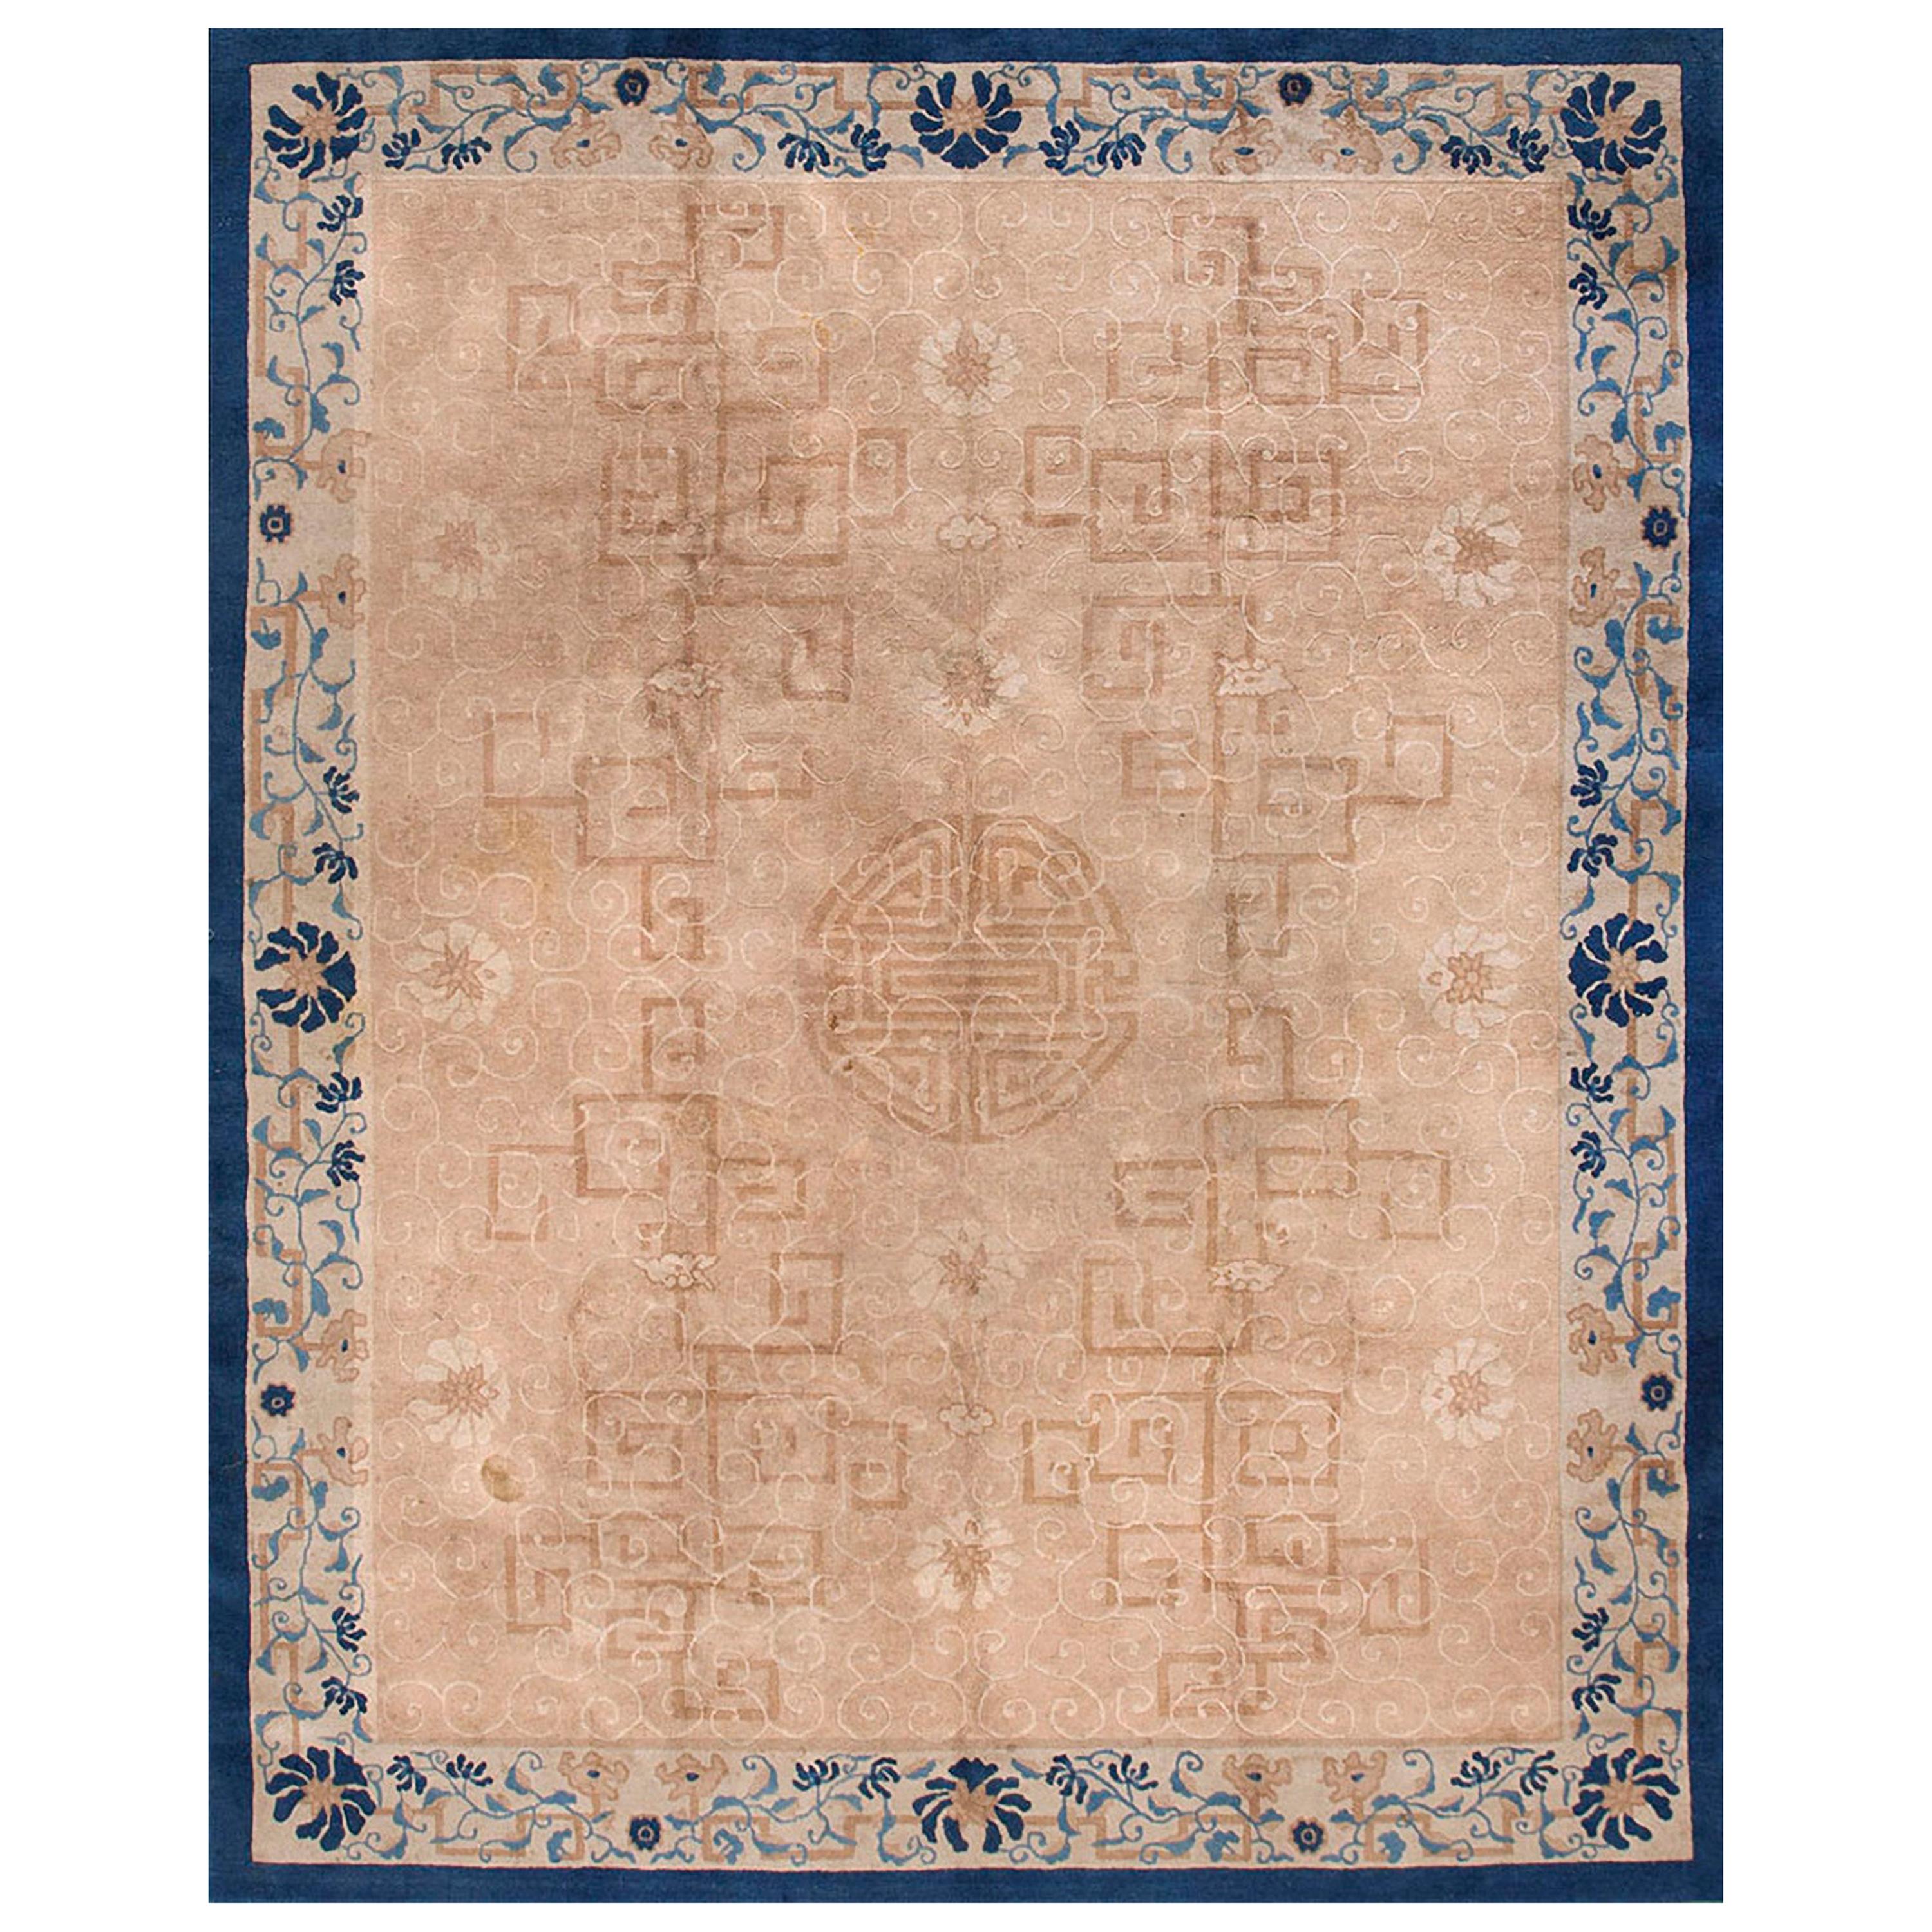 Early 20th Century Chinese Peking Carpet ( 8' 2" x 10' - 250 x 305 cm ) For Sale